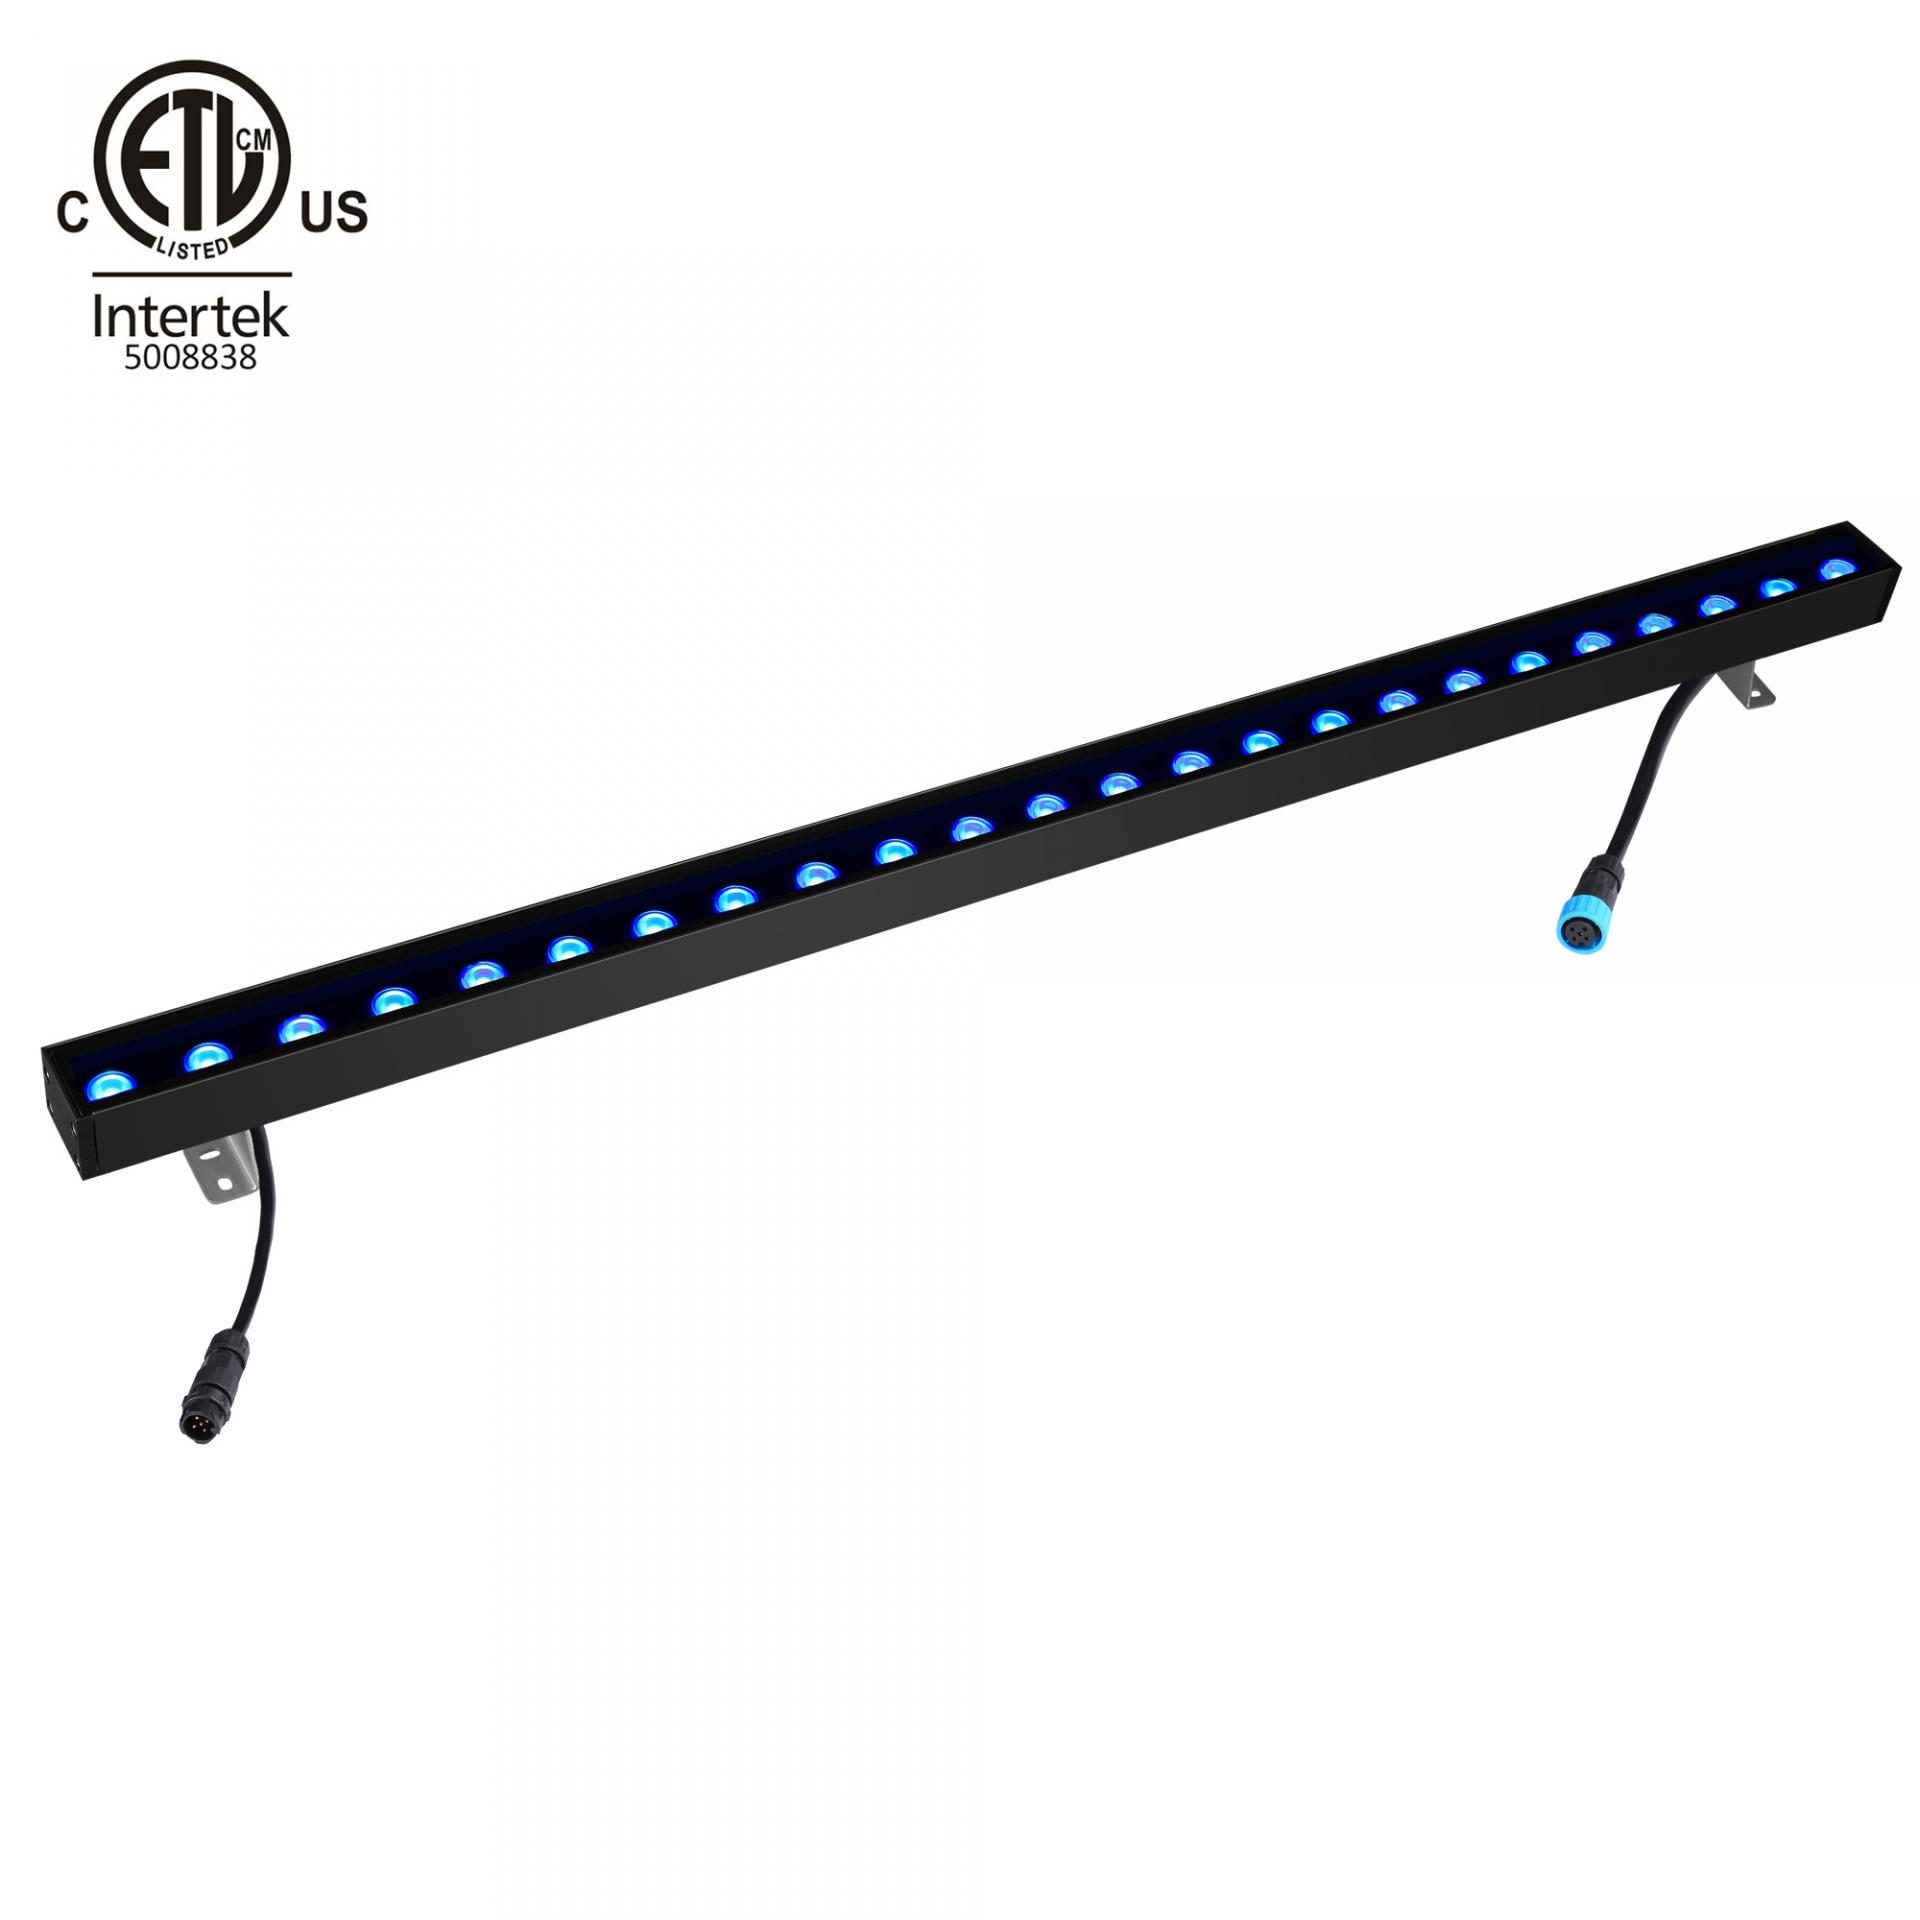 UL ETL Listed 40 inches One meter type lenght 50W RGB RGBW LED Wall Washer